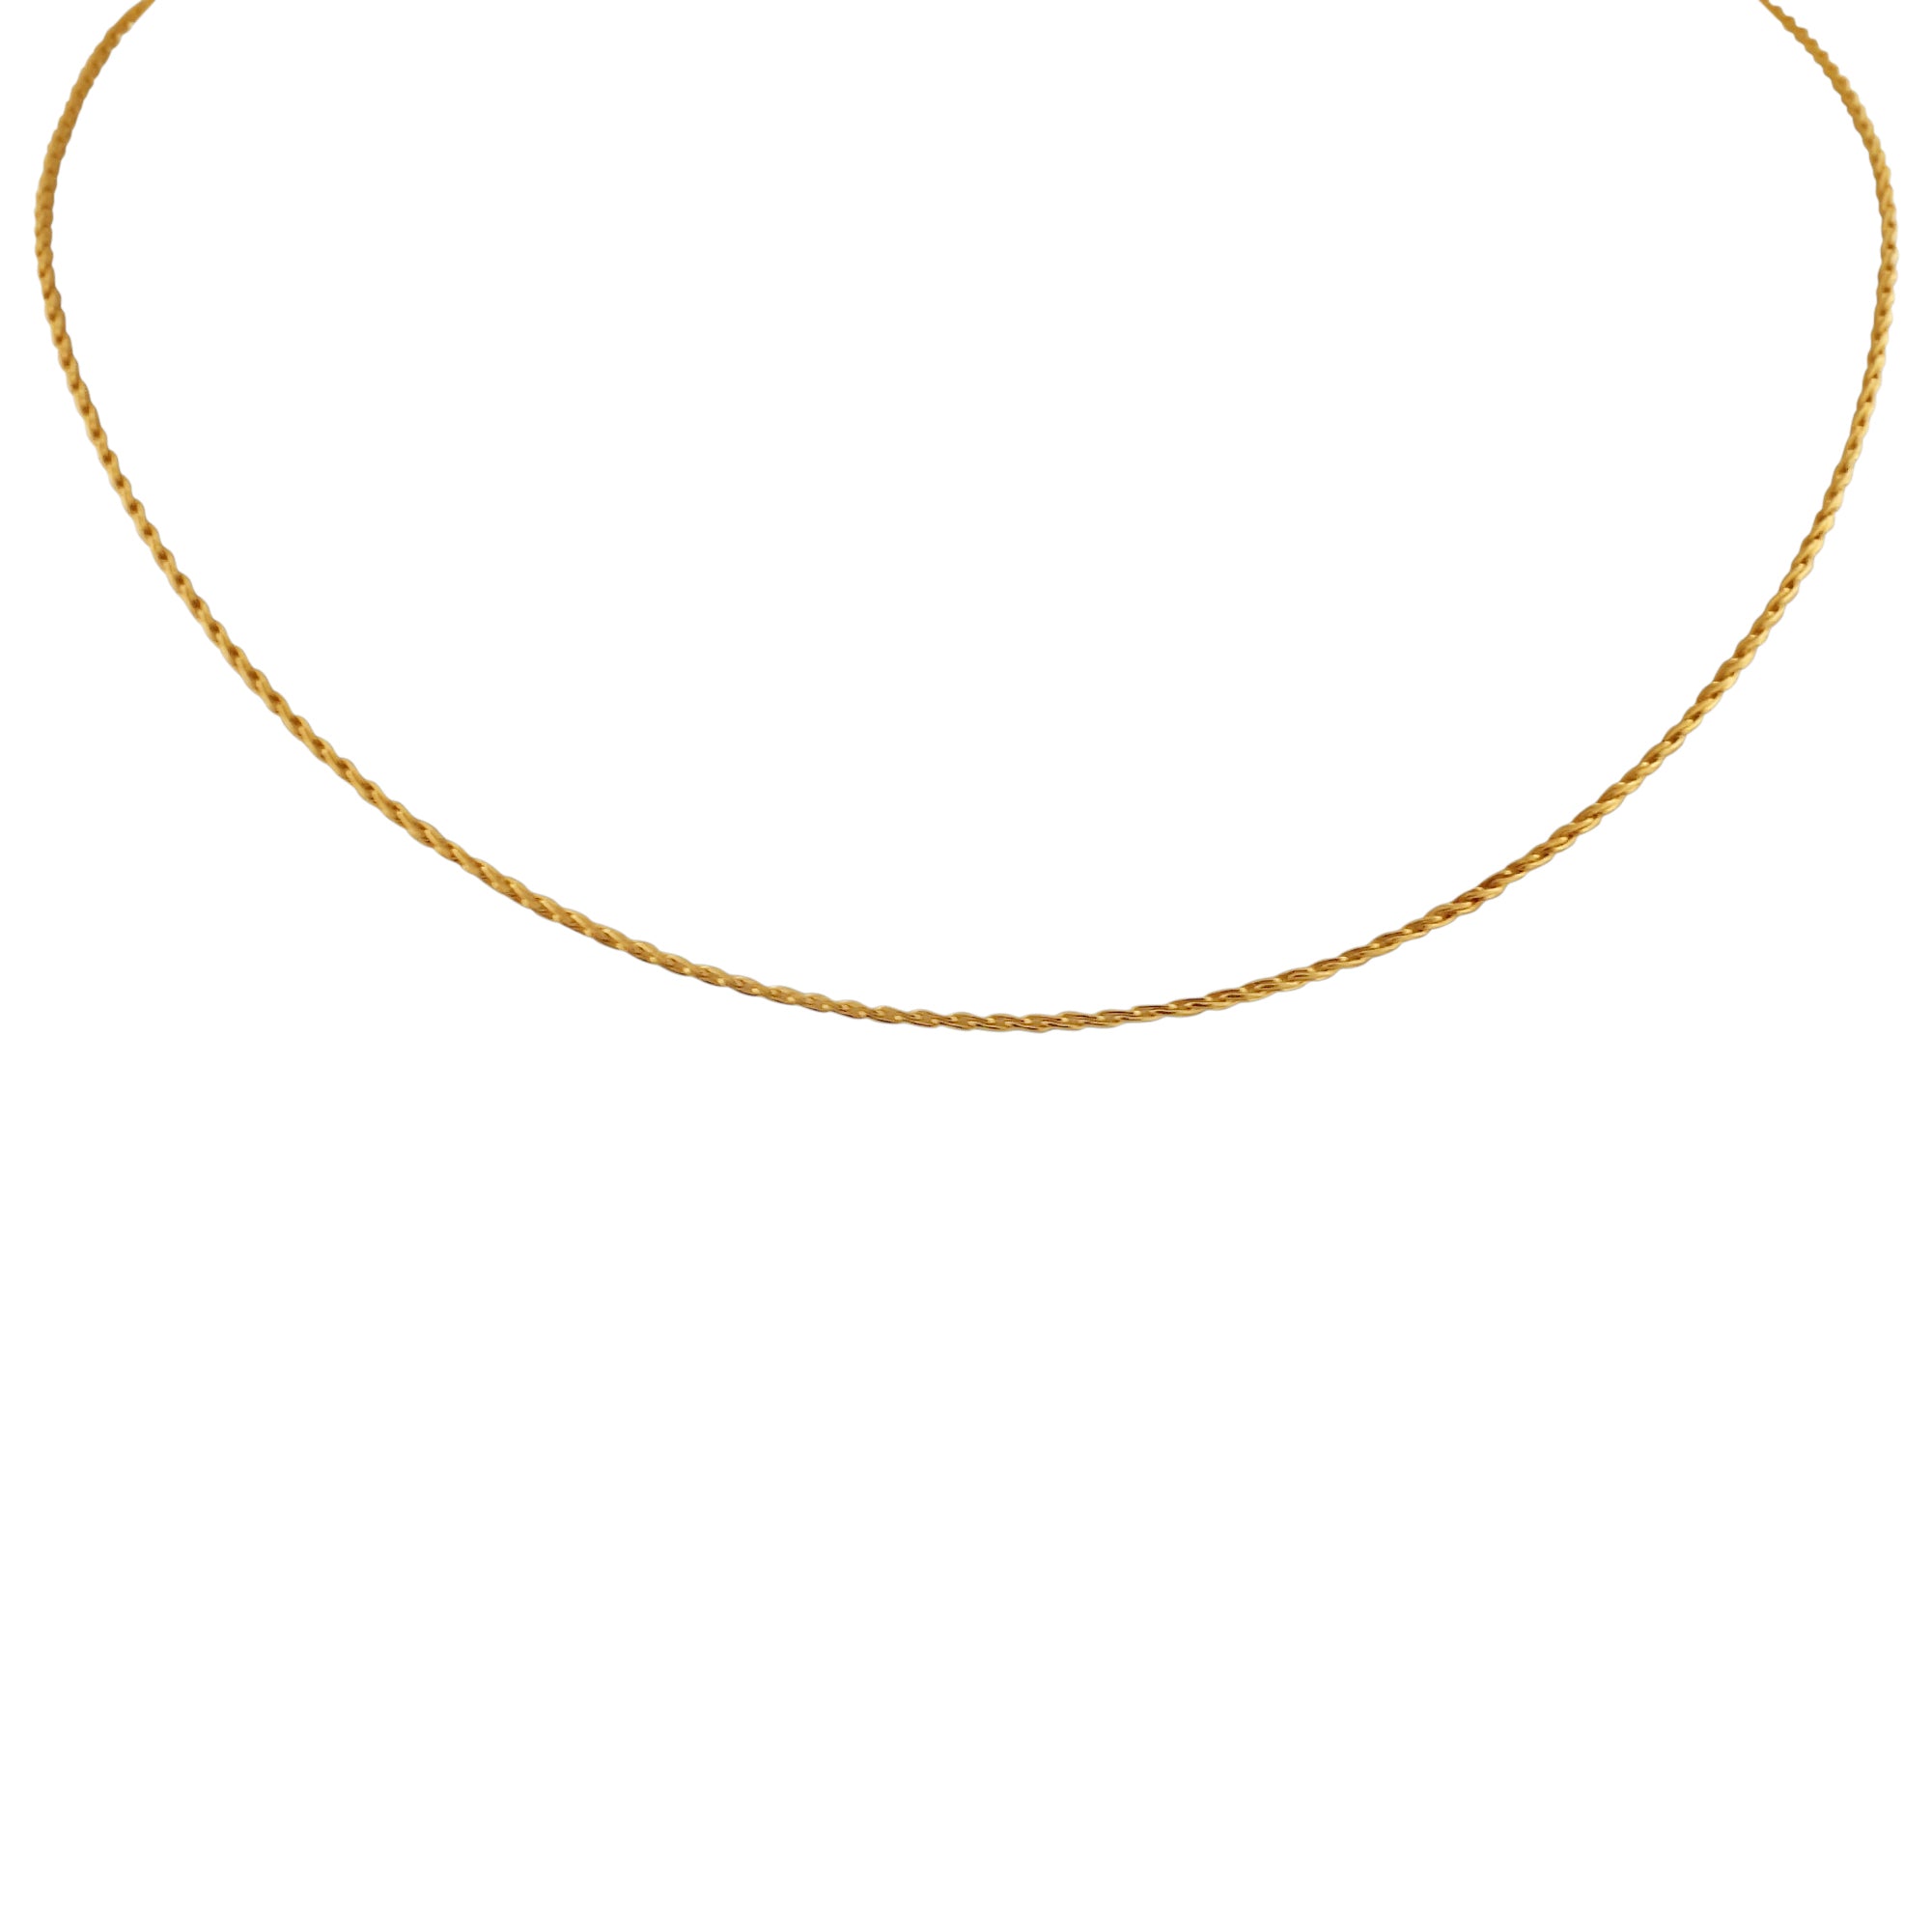 Parisian Wheat Chain in 14kt Yellow Gold (18 inches and 1.4mm wide)